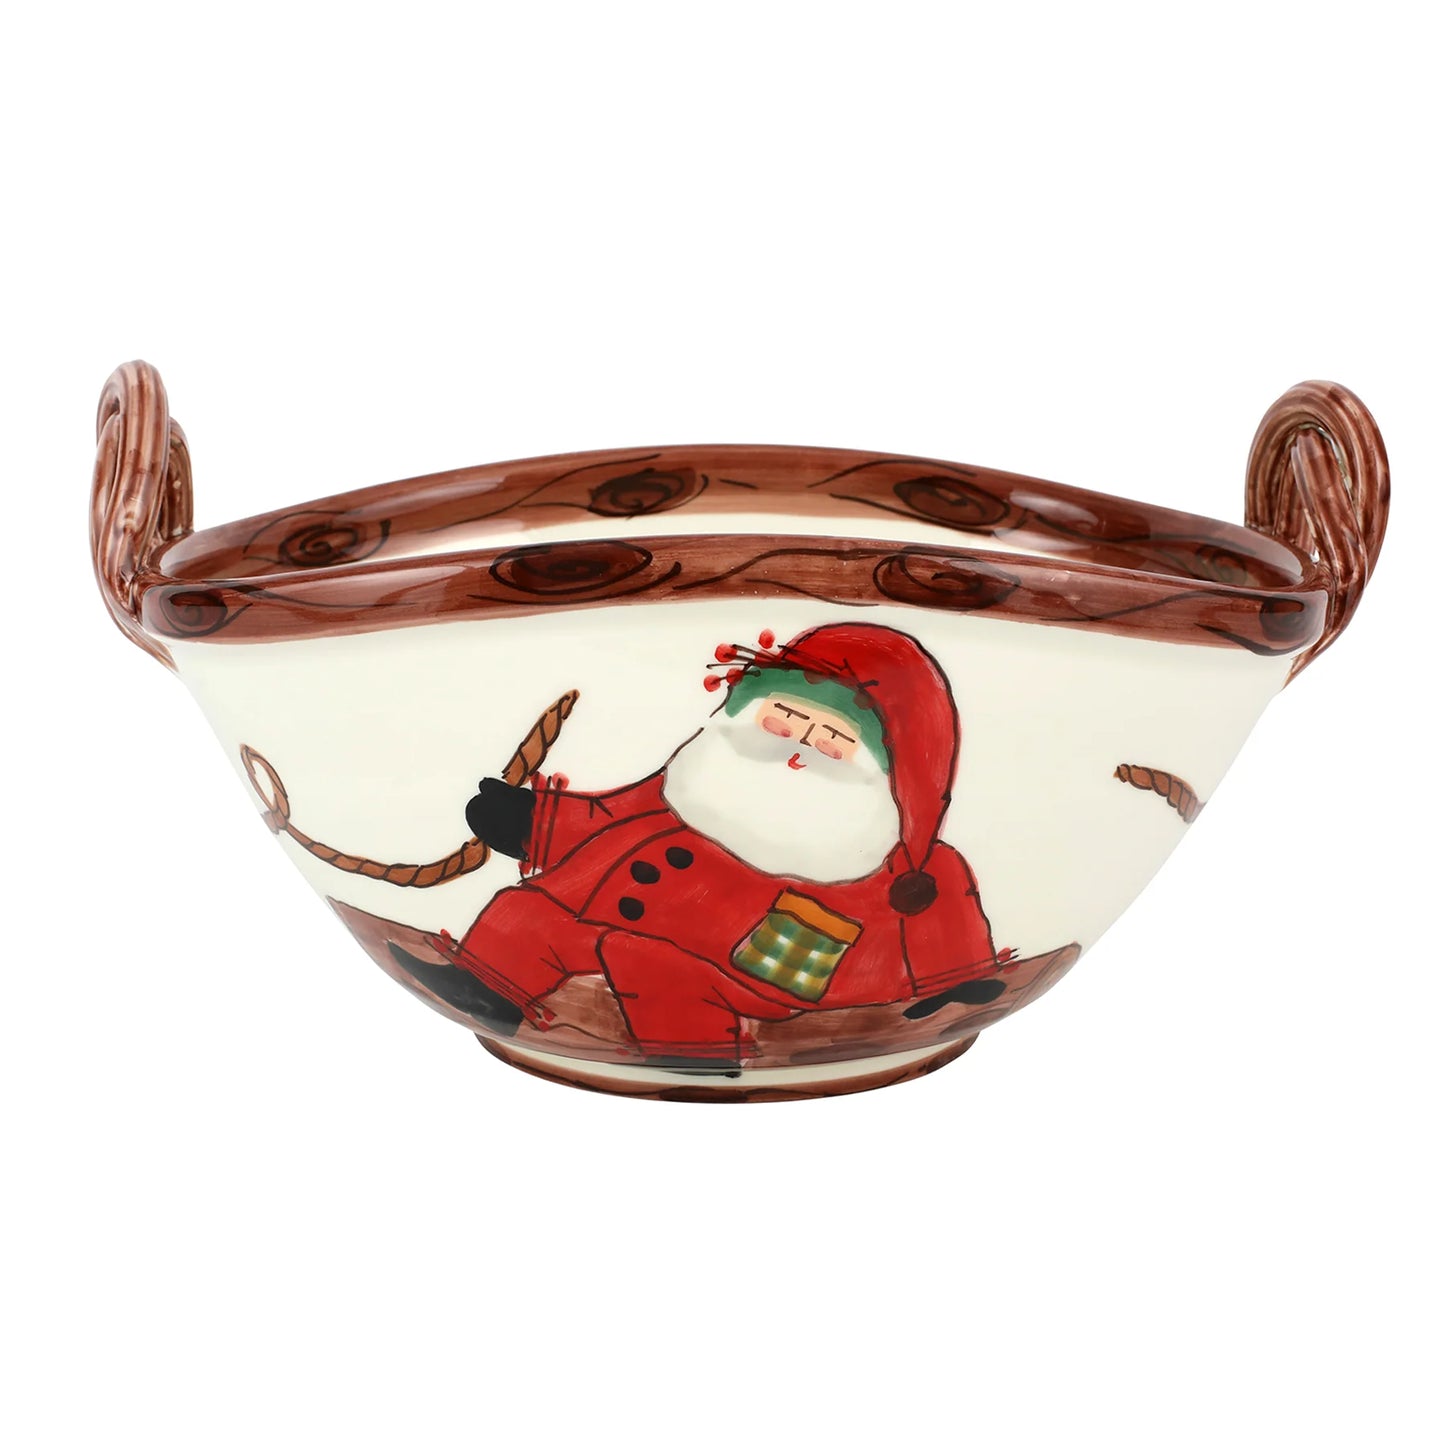 Vietri Old St. Nick Large Handled Oval Bowl with Sleigh